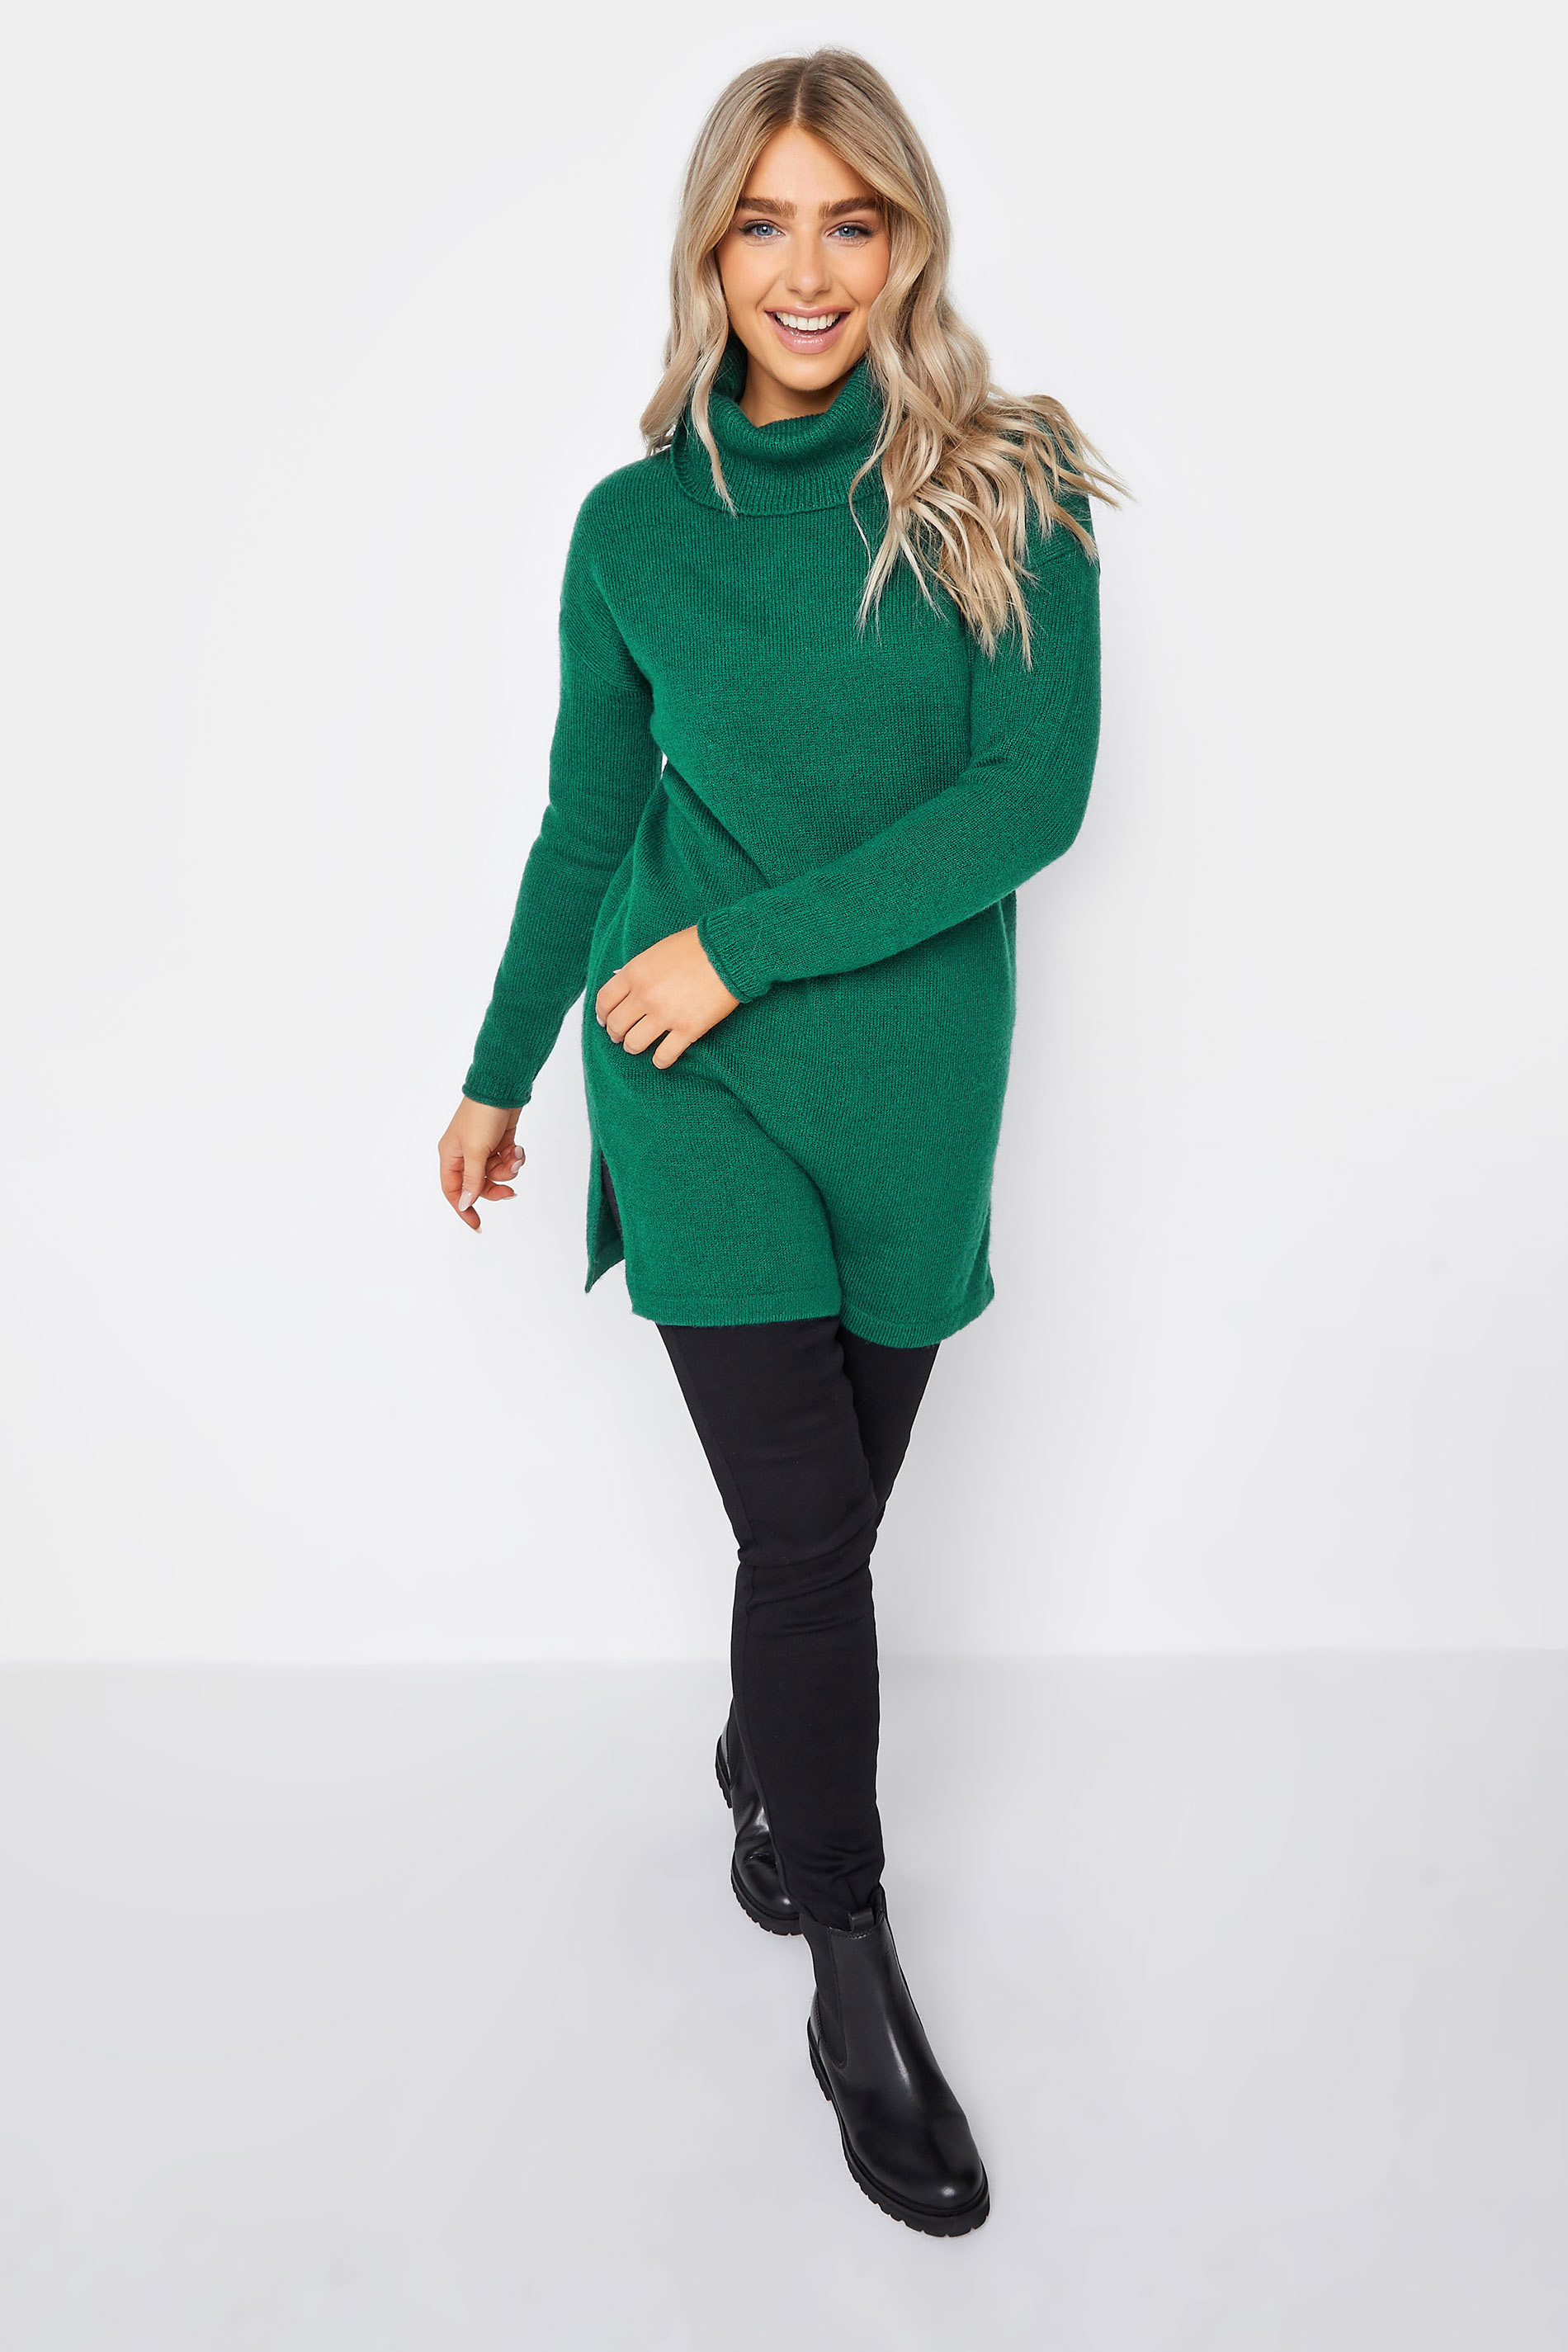 M&Co Teal Green Roll Neck Tunic Jumper | M&Co 3